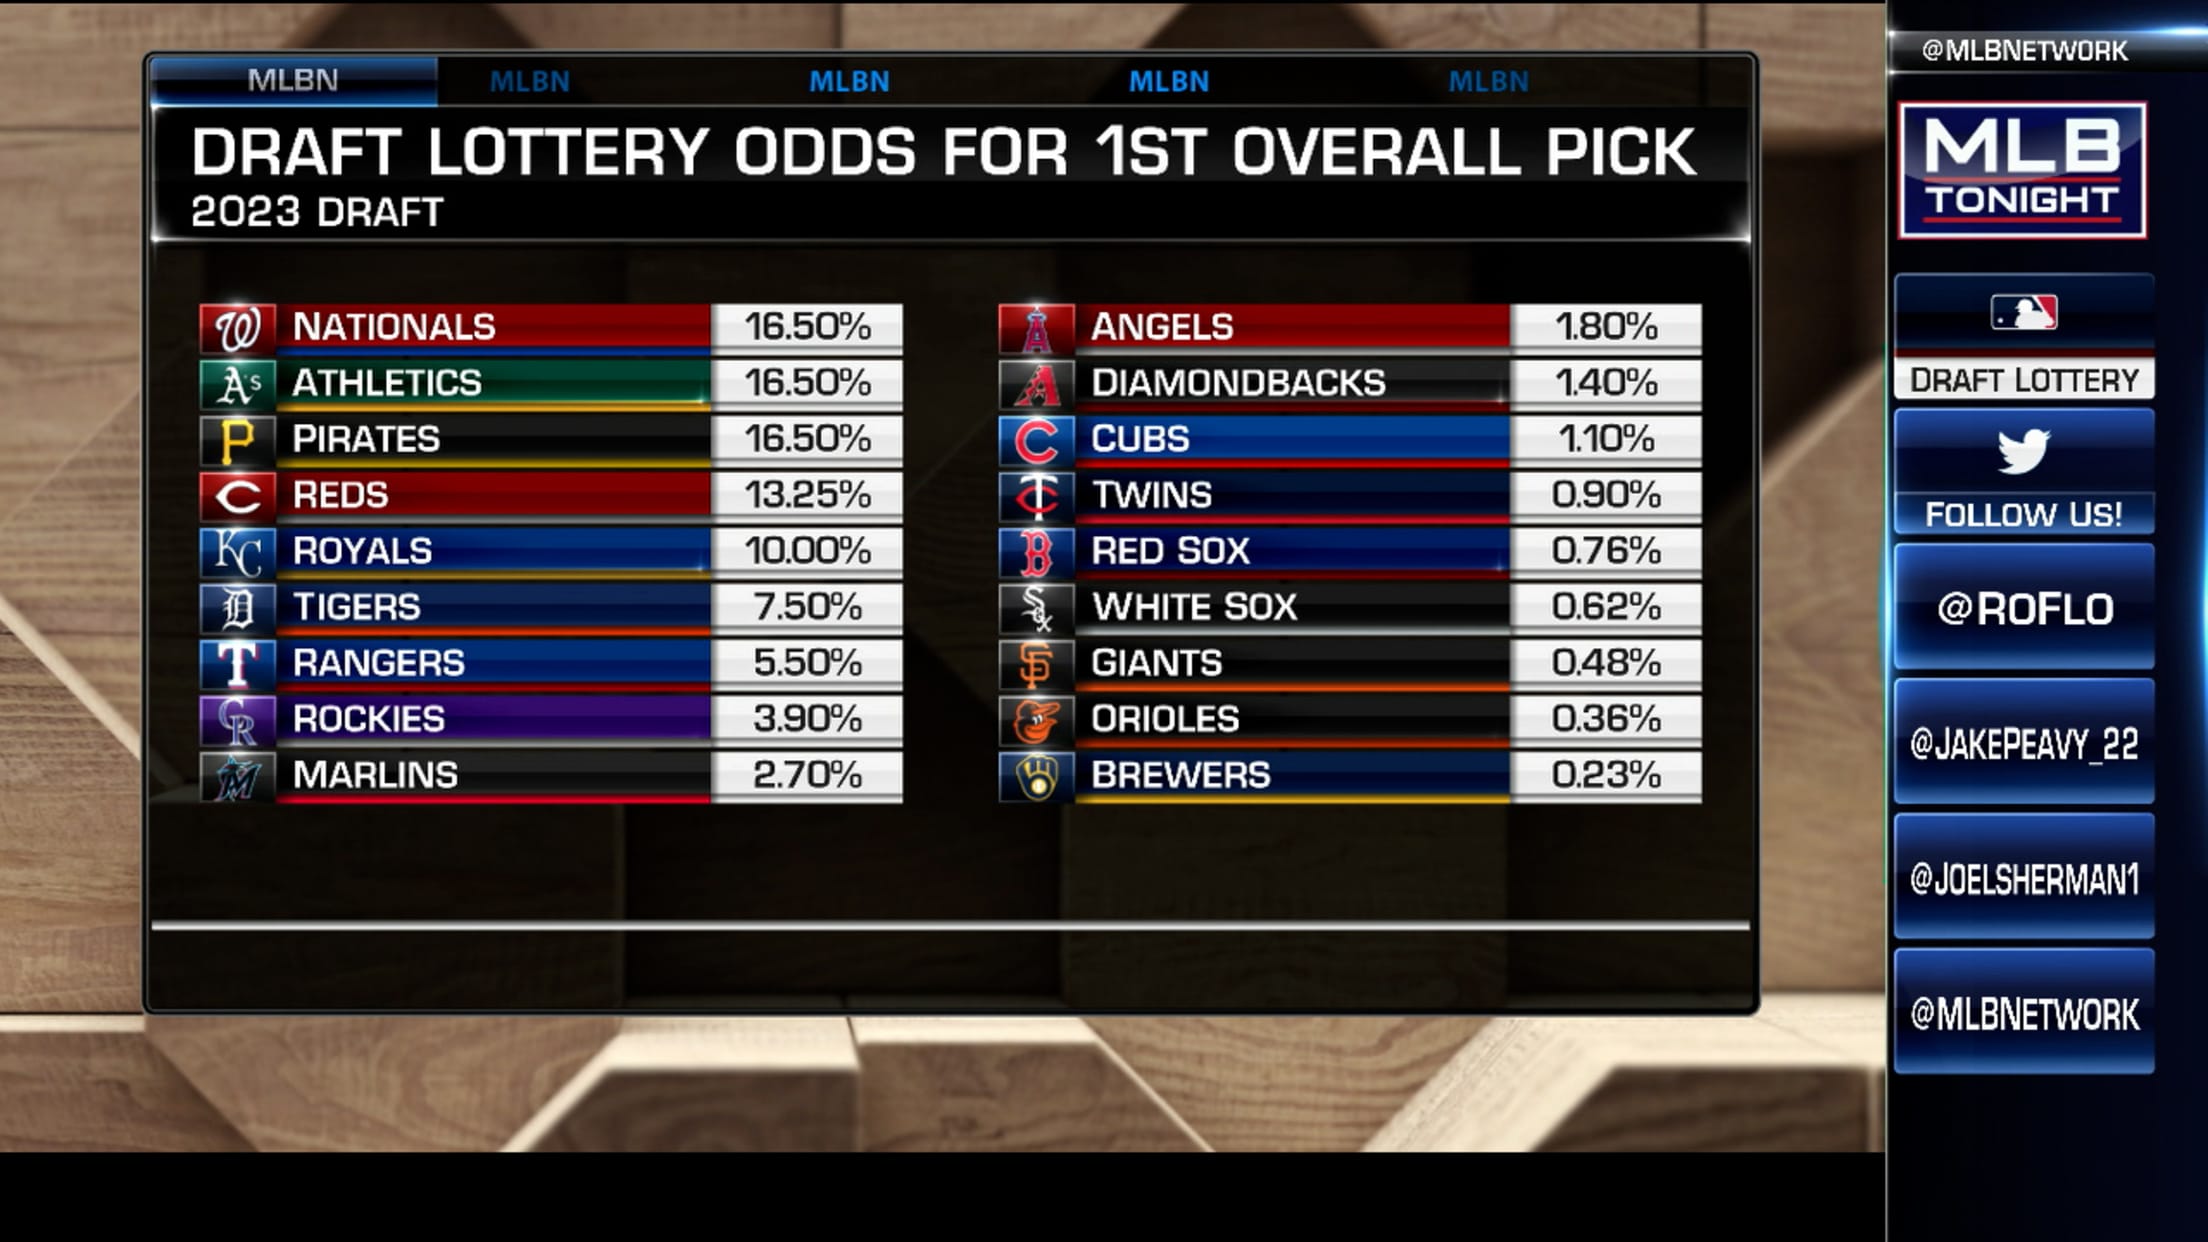 Previewing the MLB Draft Lottery